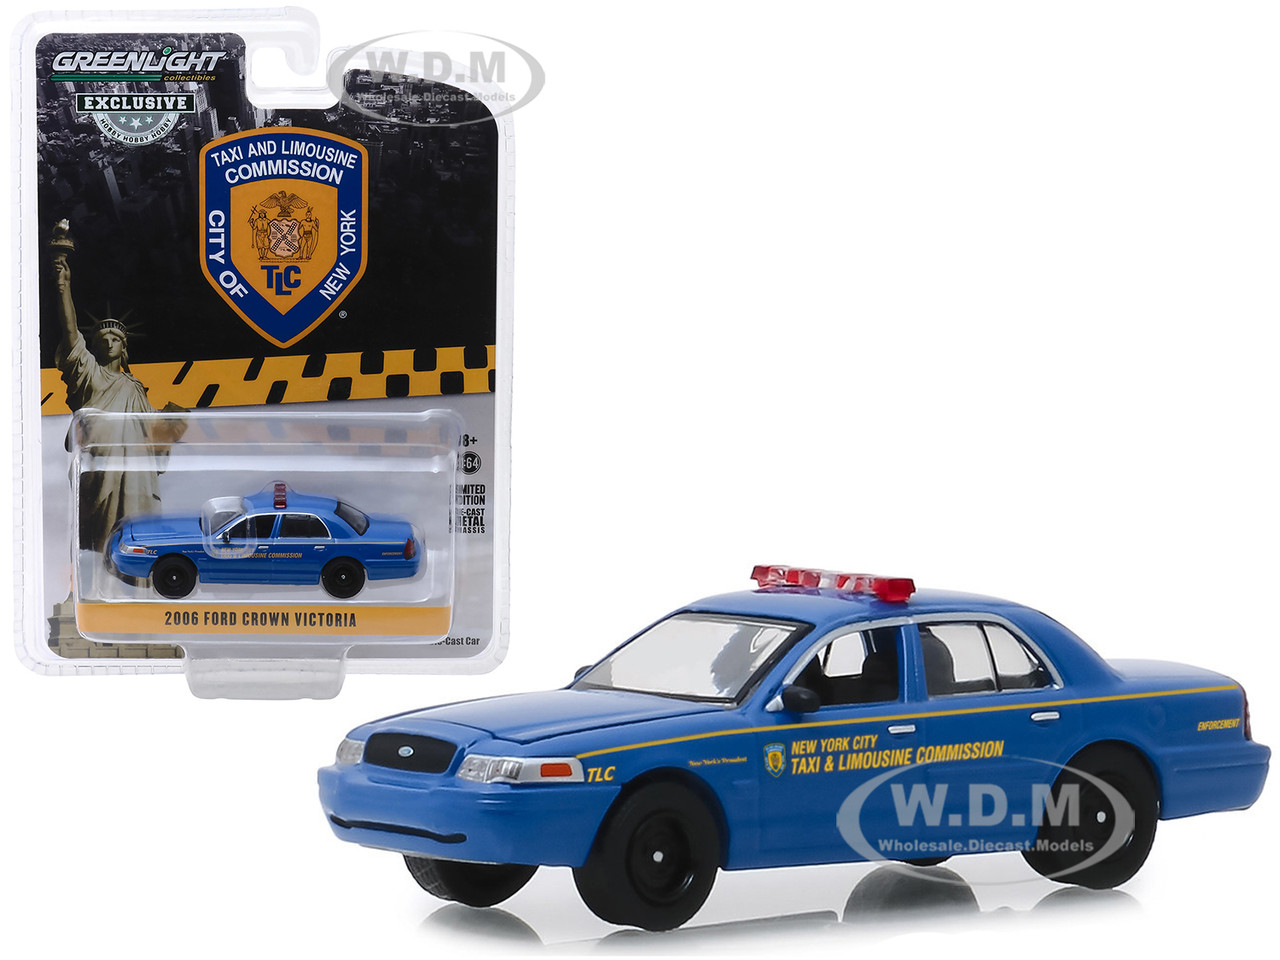 1994 94 FORD CROWN VICTORIA NYC TAXI CAB NEW YORK 1:64 SCALE DIECAST MODEL CAR 